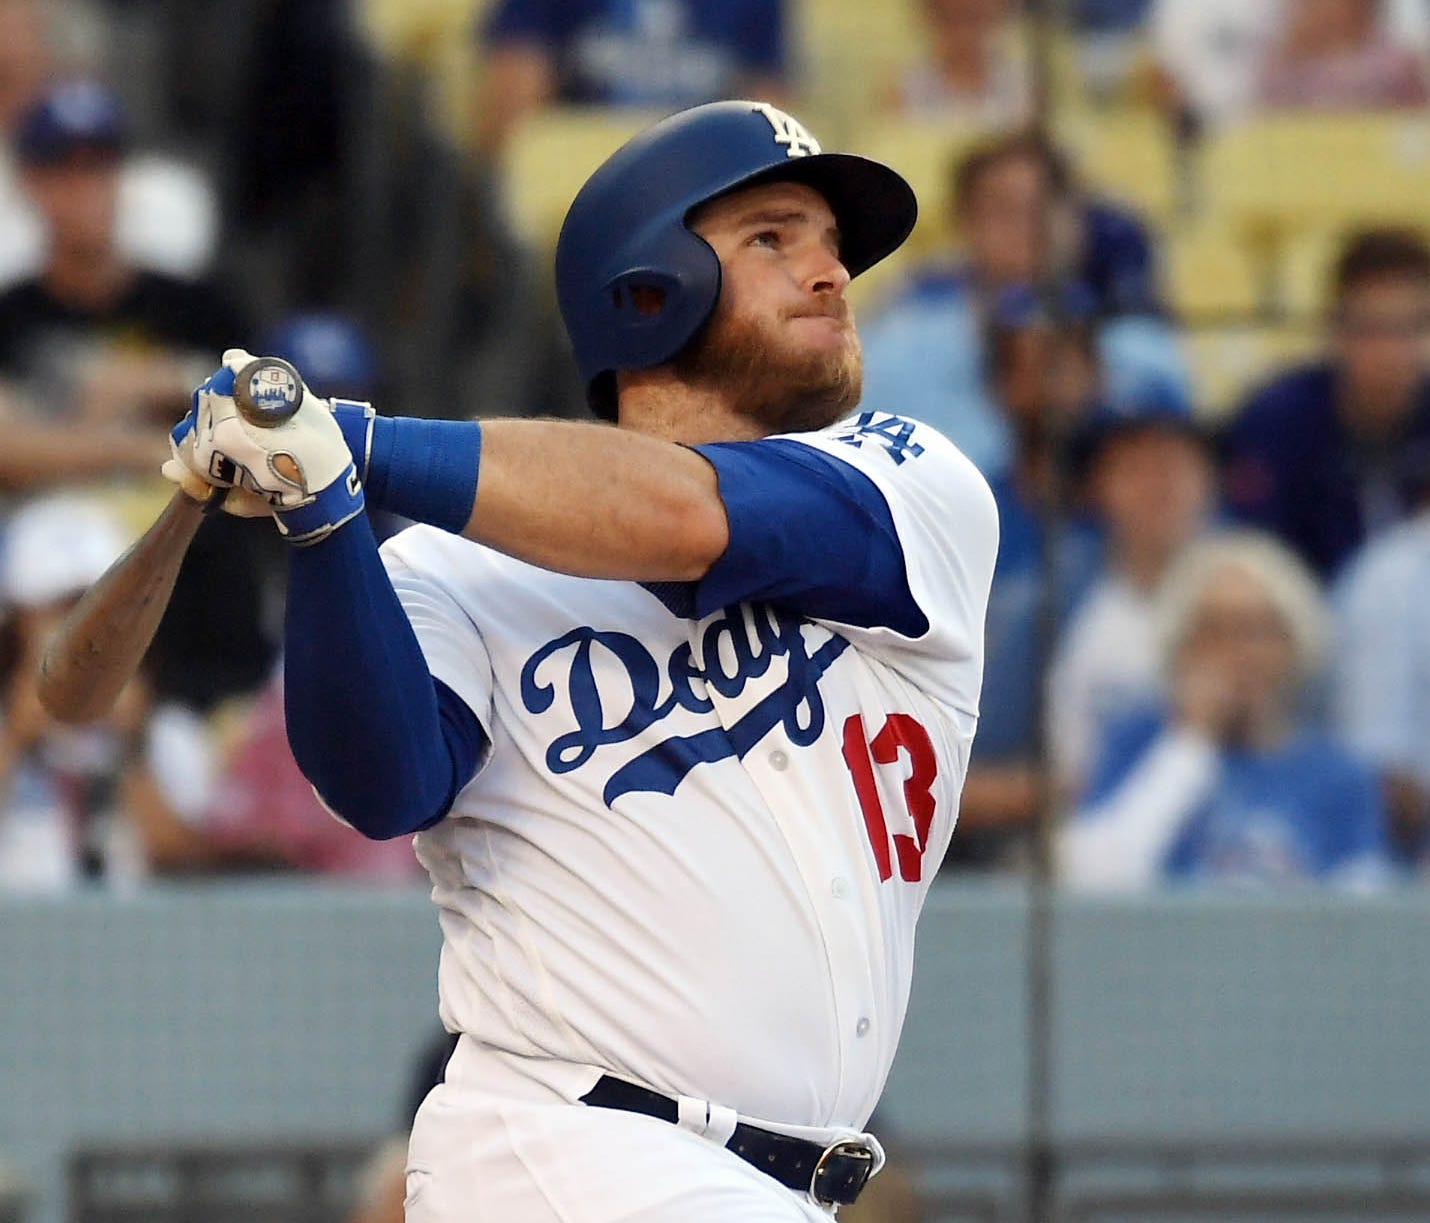 Dodgers infielder Max Muncy is tied for fourth in the National League with 20 home runs. And he's hit them in only 200 at-bats.